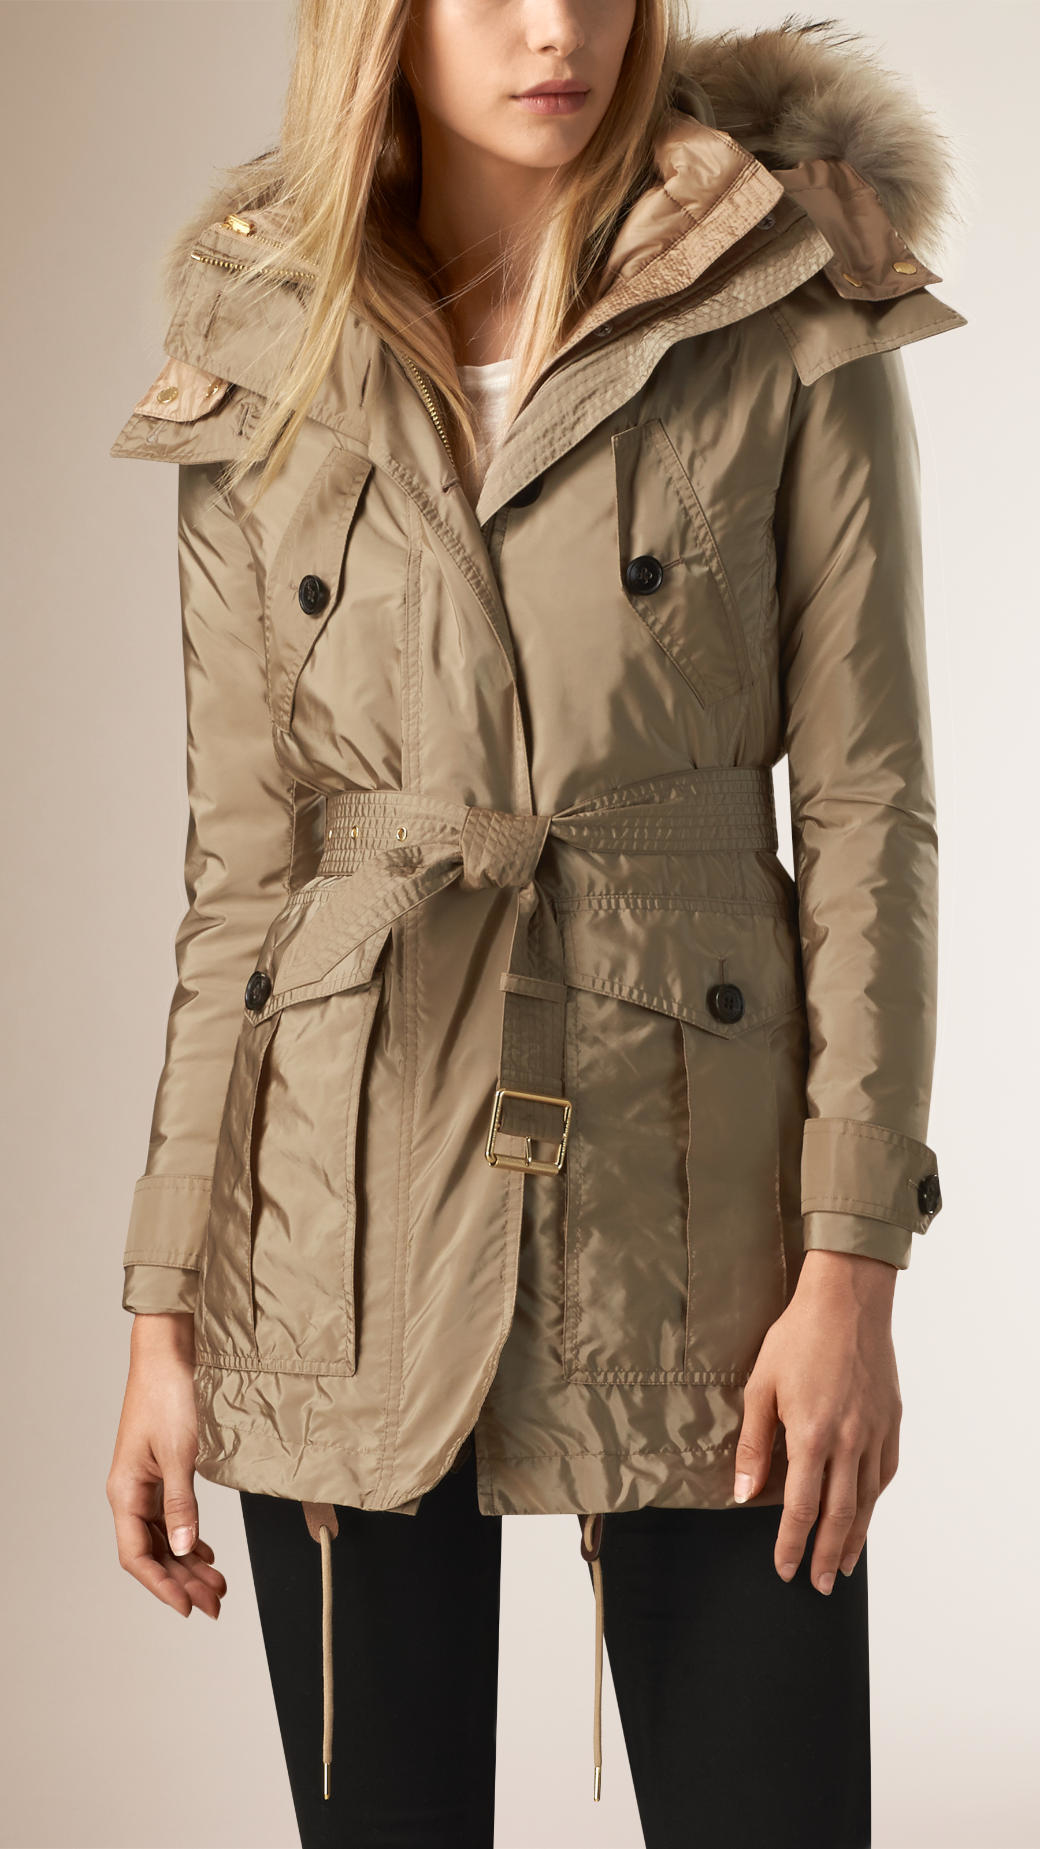 Lyst - Burberry Fur-Hooded Down Parka in Natural